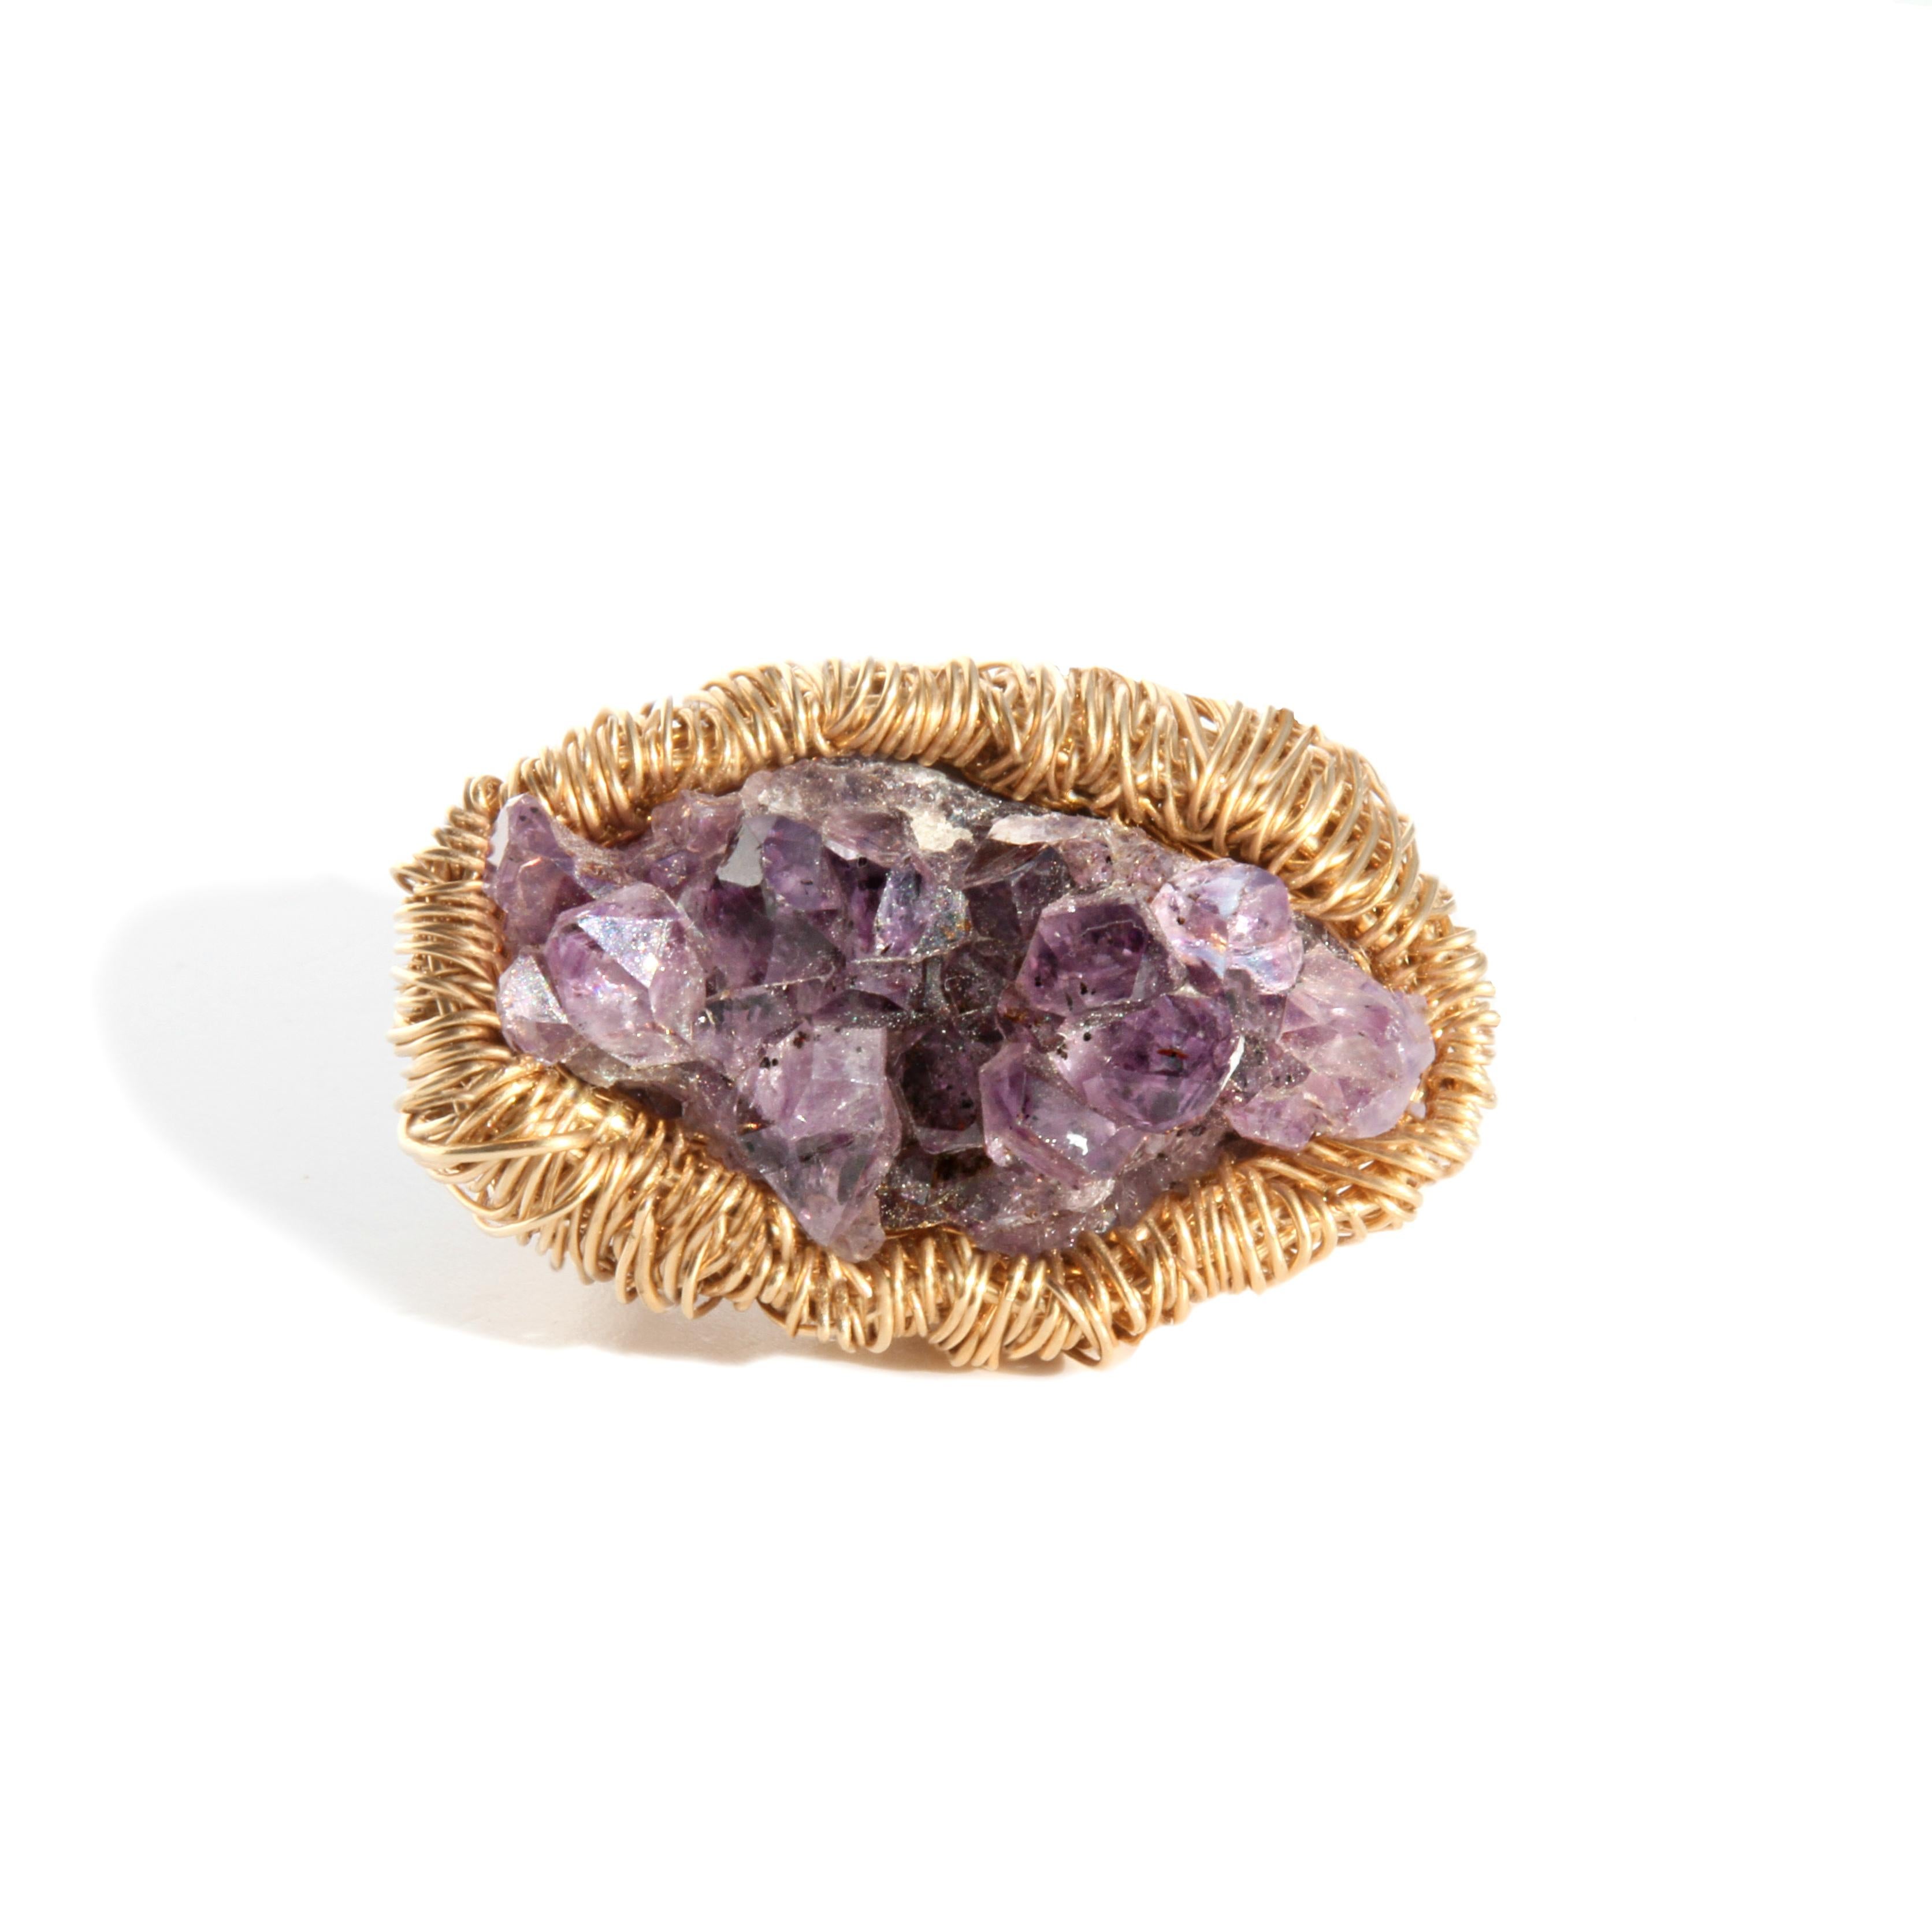 Purple Amethyst in 14 kt Gold F Statement Cocktail Ring by the artist For Sale 7